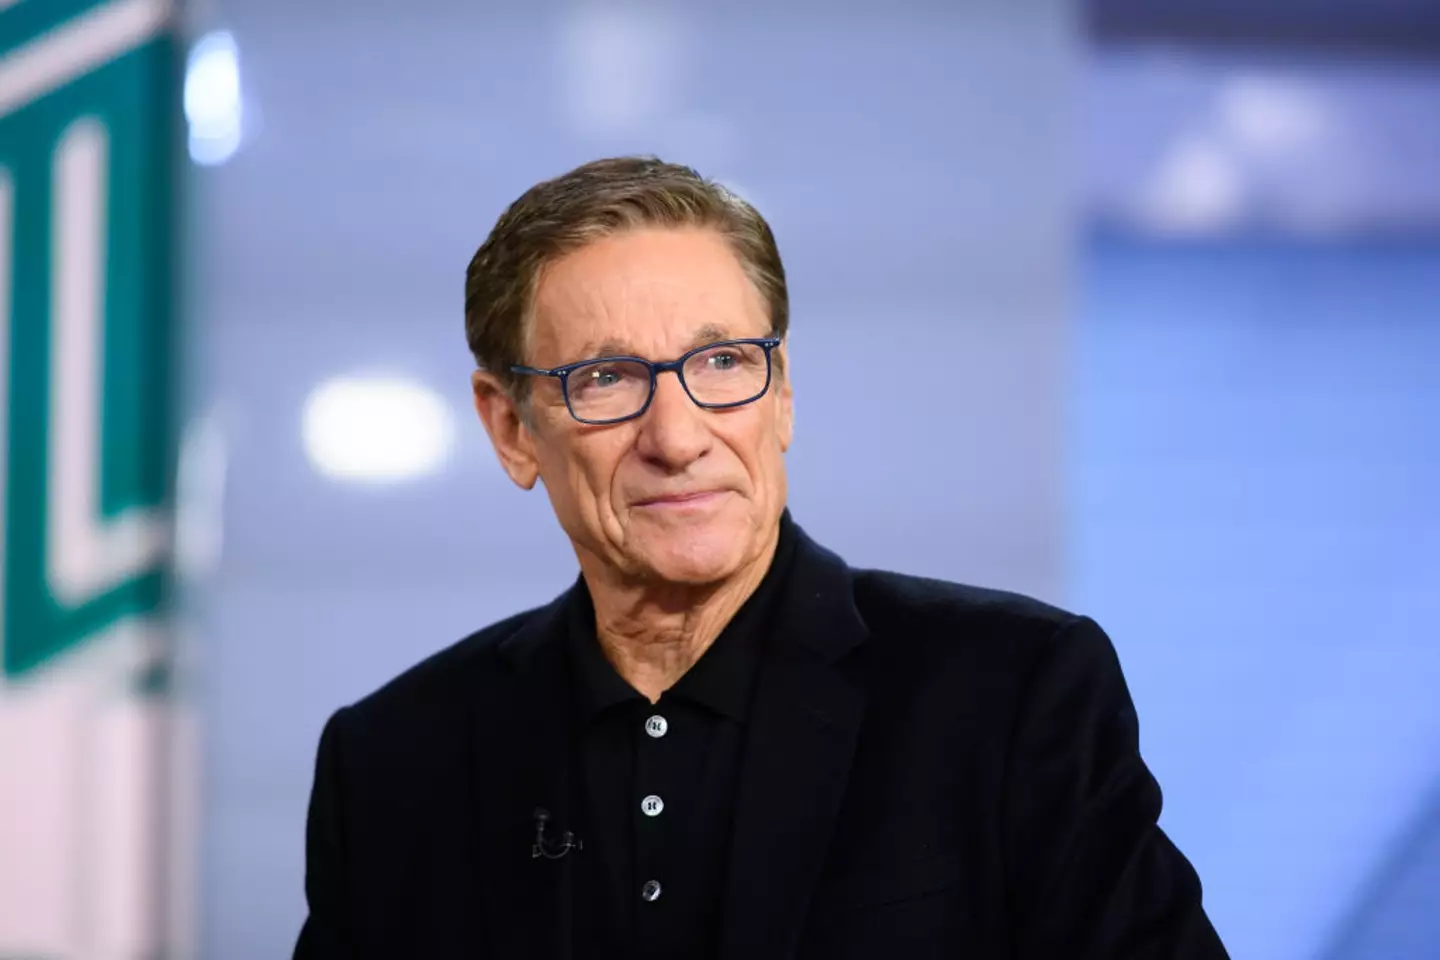 Maury Povich has said he'd happily come out of retirement to help the actors with a DNA test.